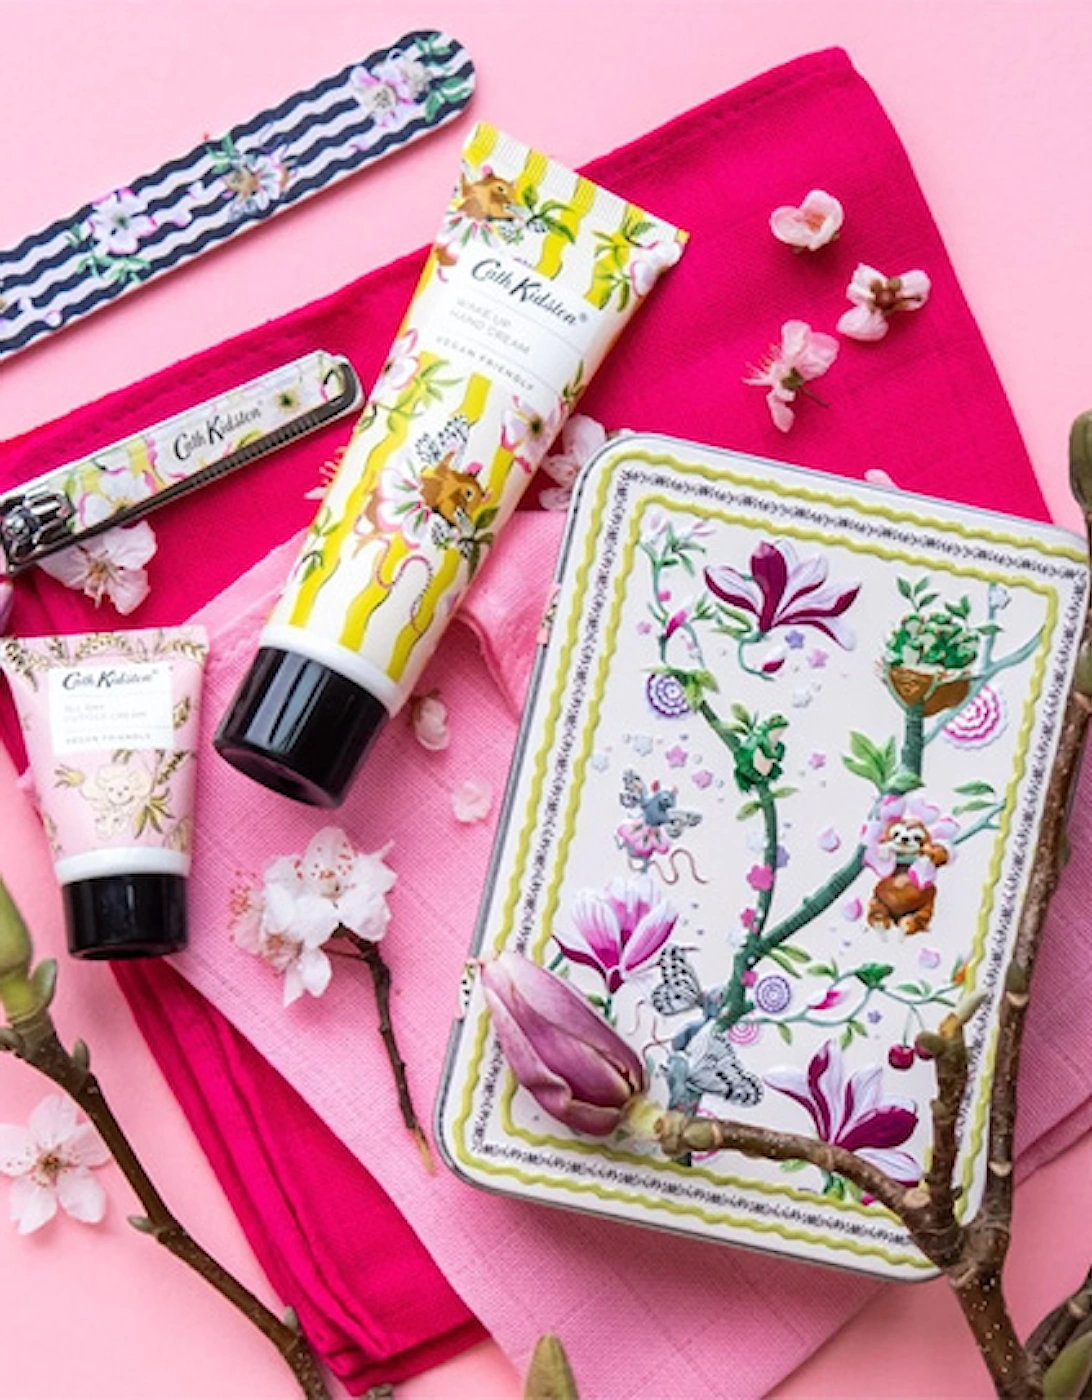 The Story Tree Manicure Set in Tin (Hand Cream 50ml, Cuticle Cream 15ml, Emery Board, Nail Clippers)